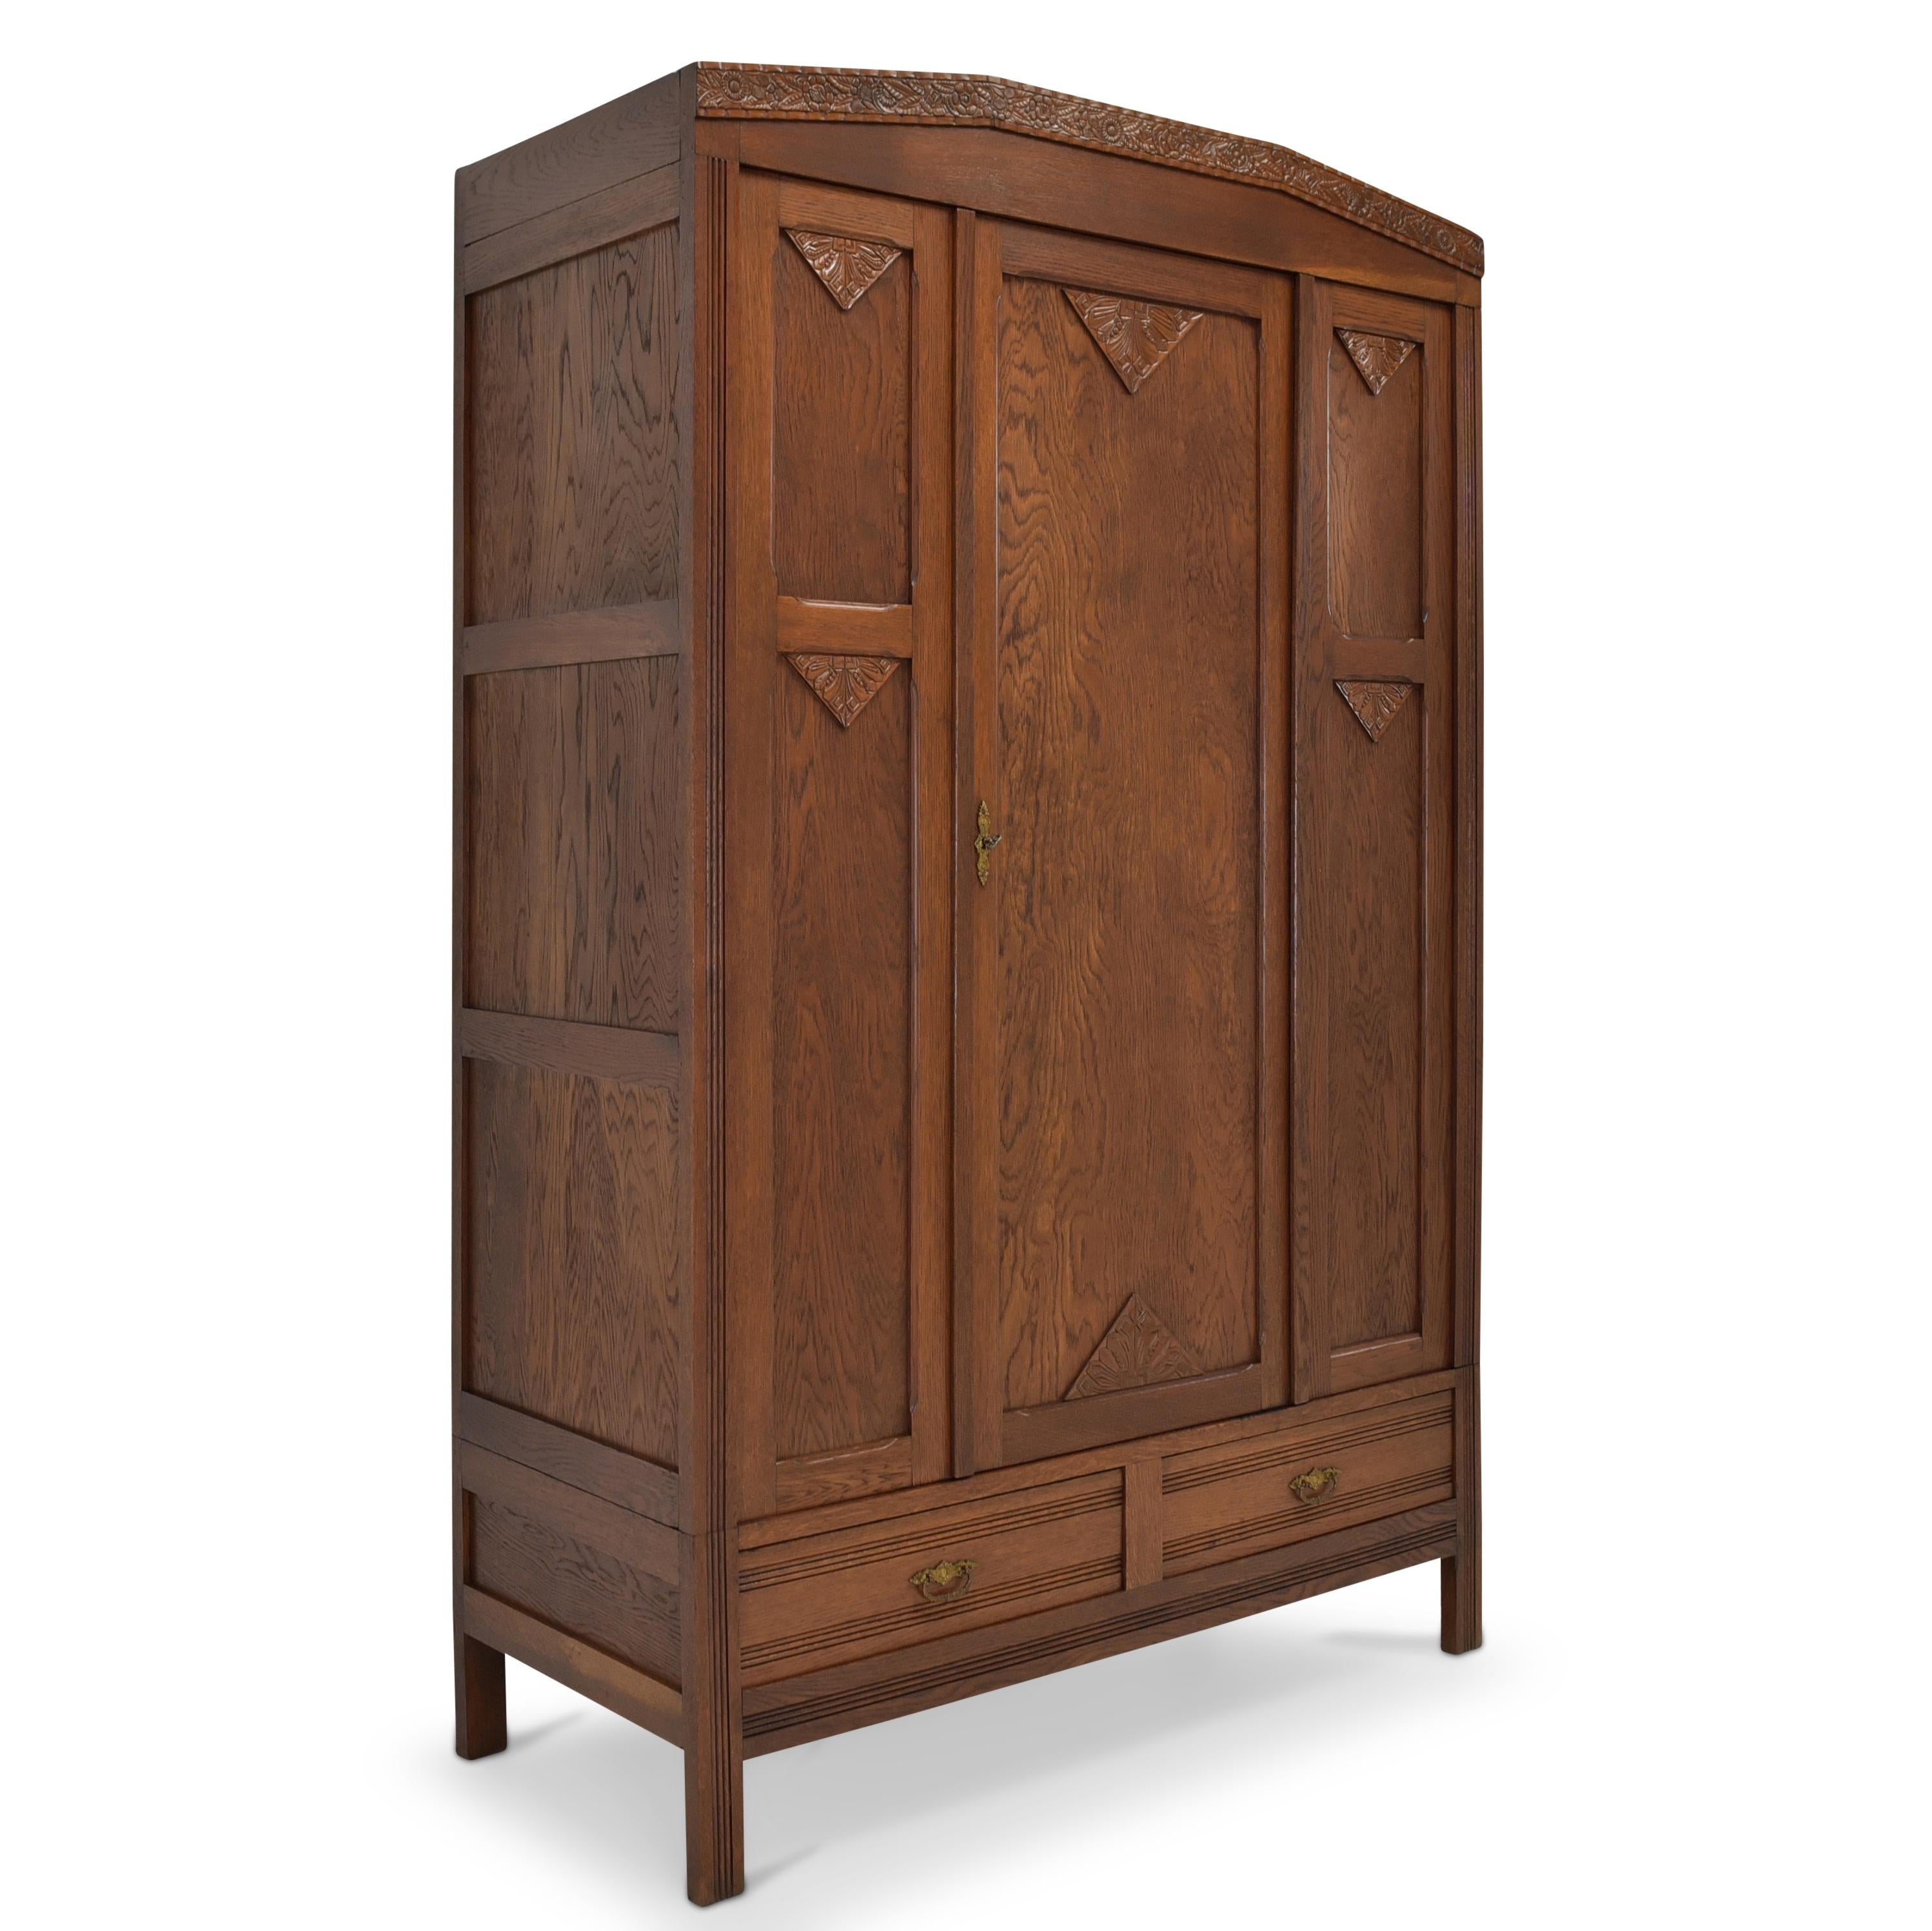 Hallway closet restored Art Deco circa 1930 oak closet

Features:
Single-door model with two drawers and clothes rail
Geometric shape
Abstract carving applications
Very nice patina
Extraordinary model
The cabinet can be